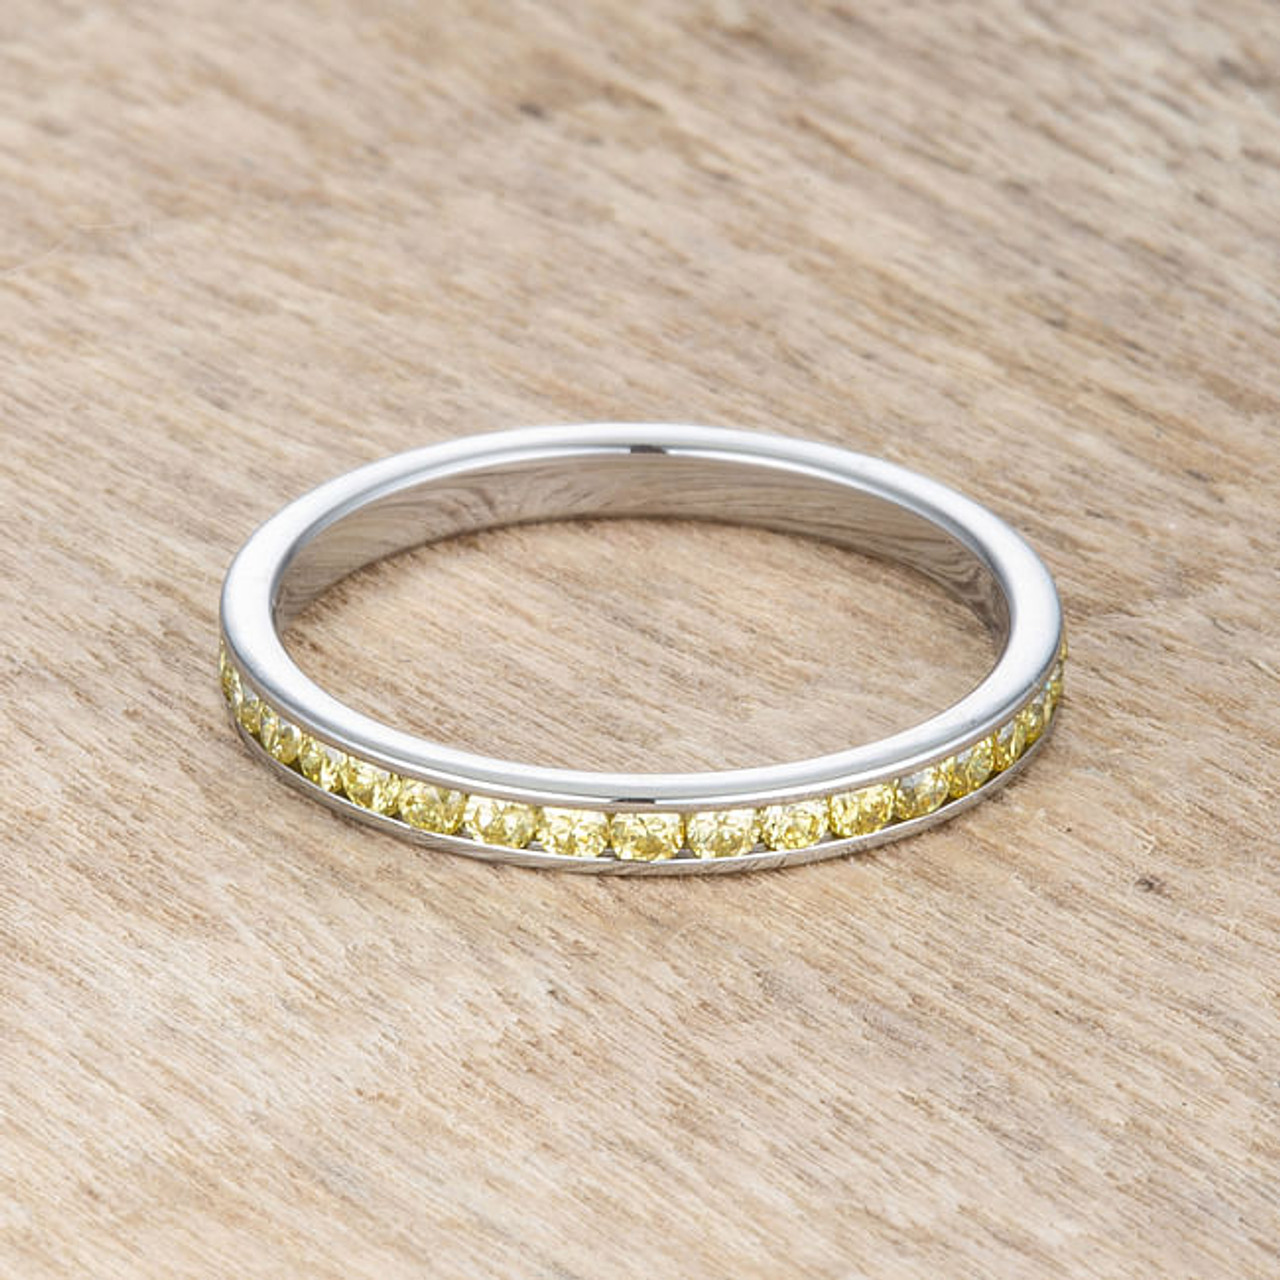 Teresa 0.5ct Jonquil CZ Stainless Steel Eternity Band